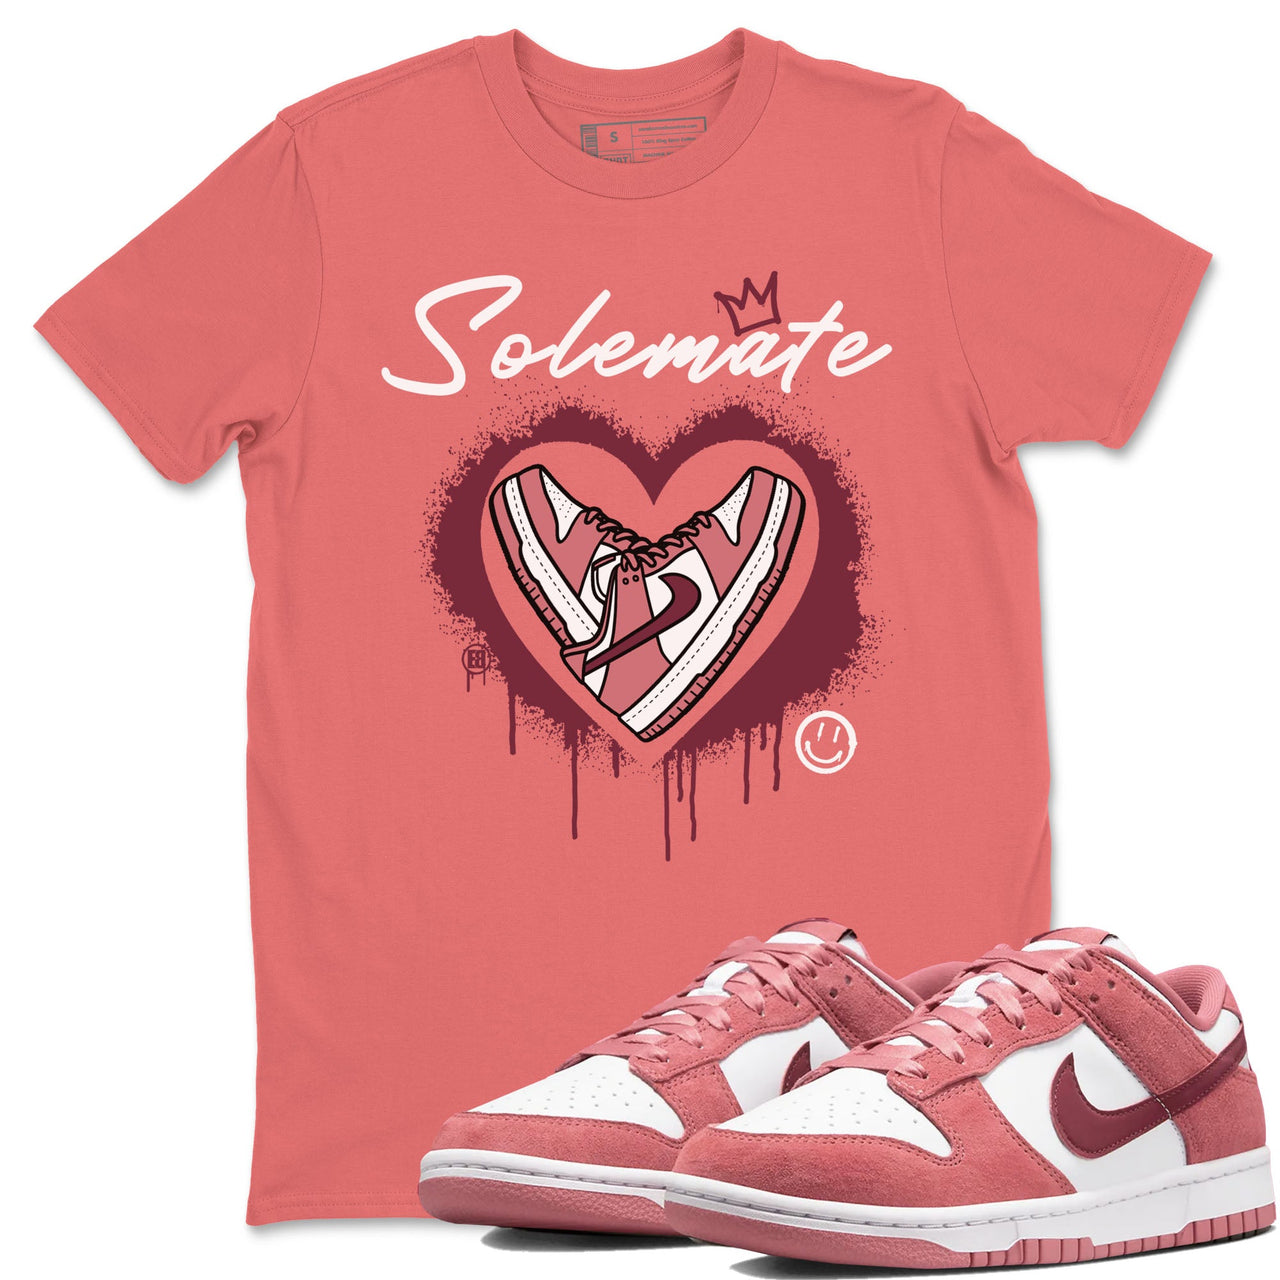 Solemate sneaker match tees to Dunk Valentine's Day street fashion brand for shirts to match Jordans SNRT Sneaker Tees Dunk Valentine's Day unisex t-shirt Coral 1 unisex shirt